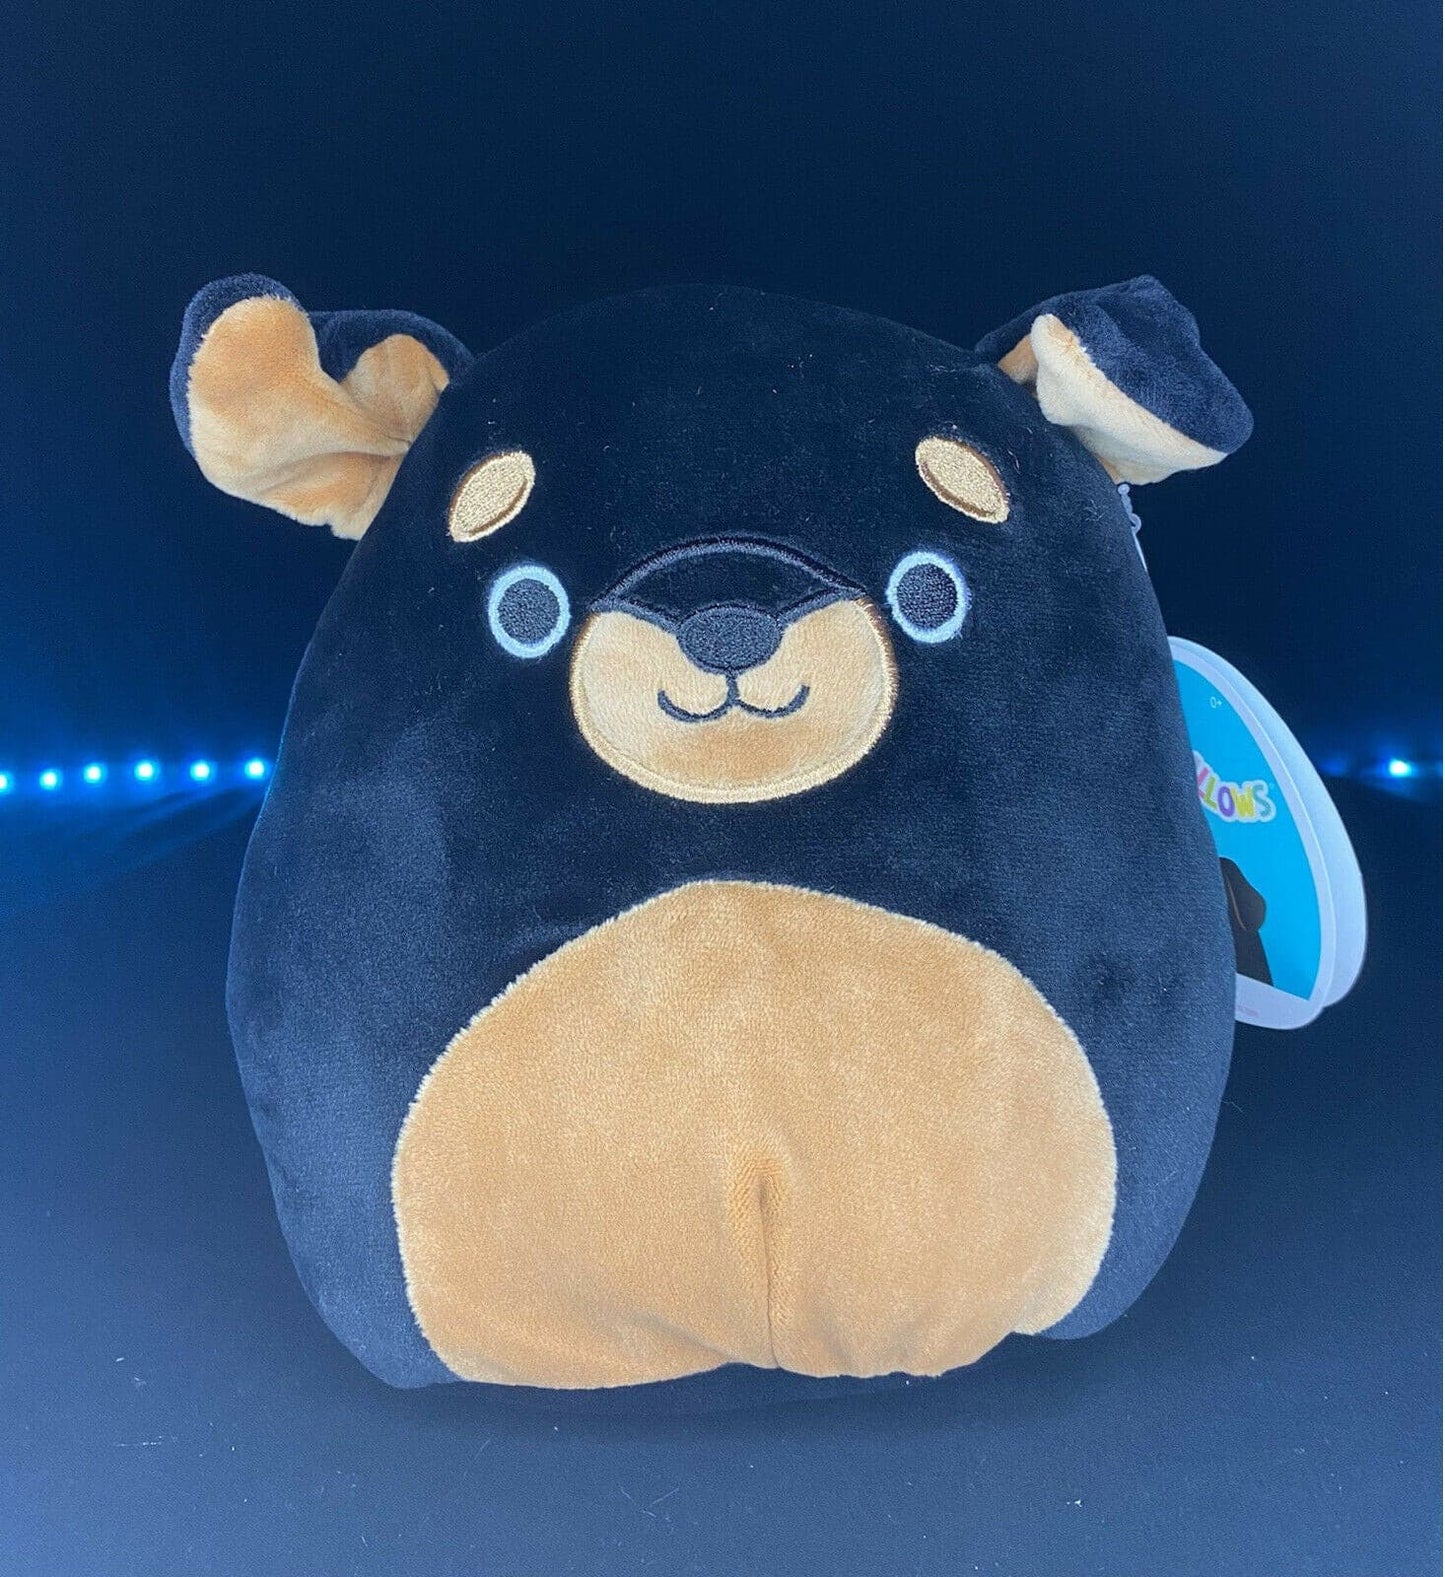 Squishmallows Mateo The Stuffed Animal Rottweiler Dog Plush Toy - 10 in